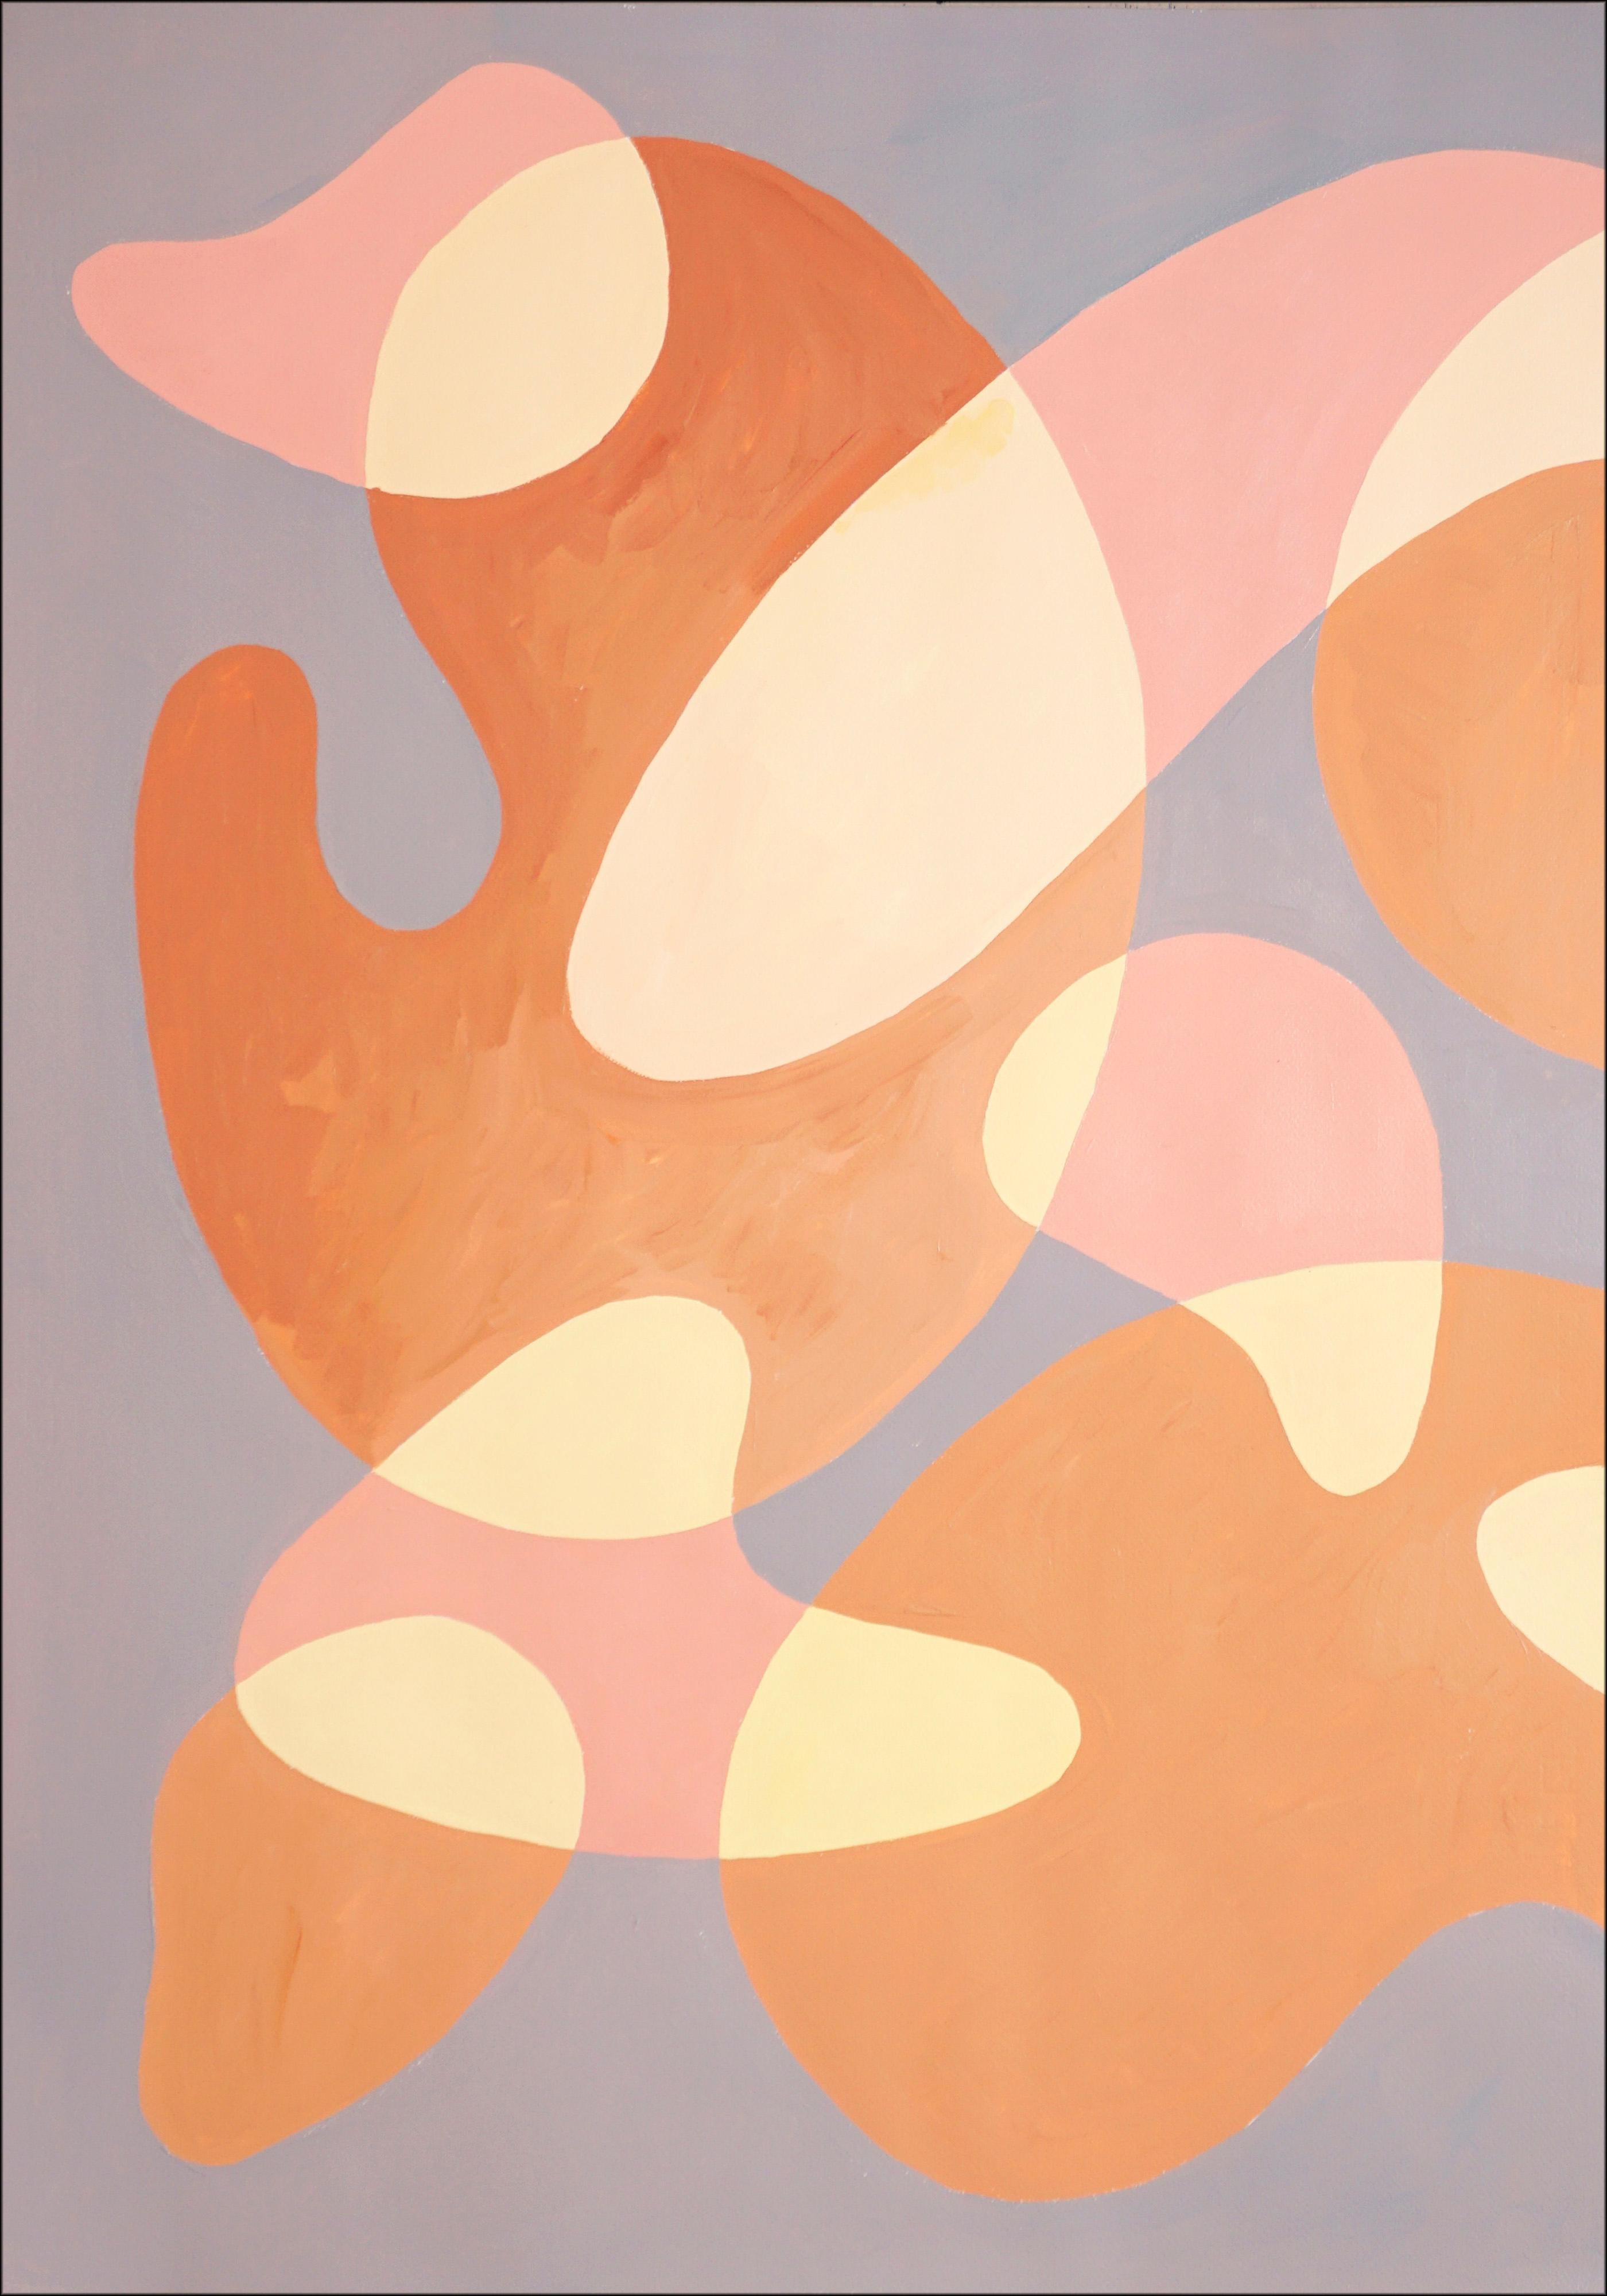 Dancing Bodies in a Dark Room, Nude Tones Diptych, Pale Pink Gray Organic Shapes - Modern Painting by Ryan Rivadeneyra